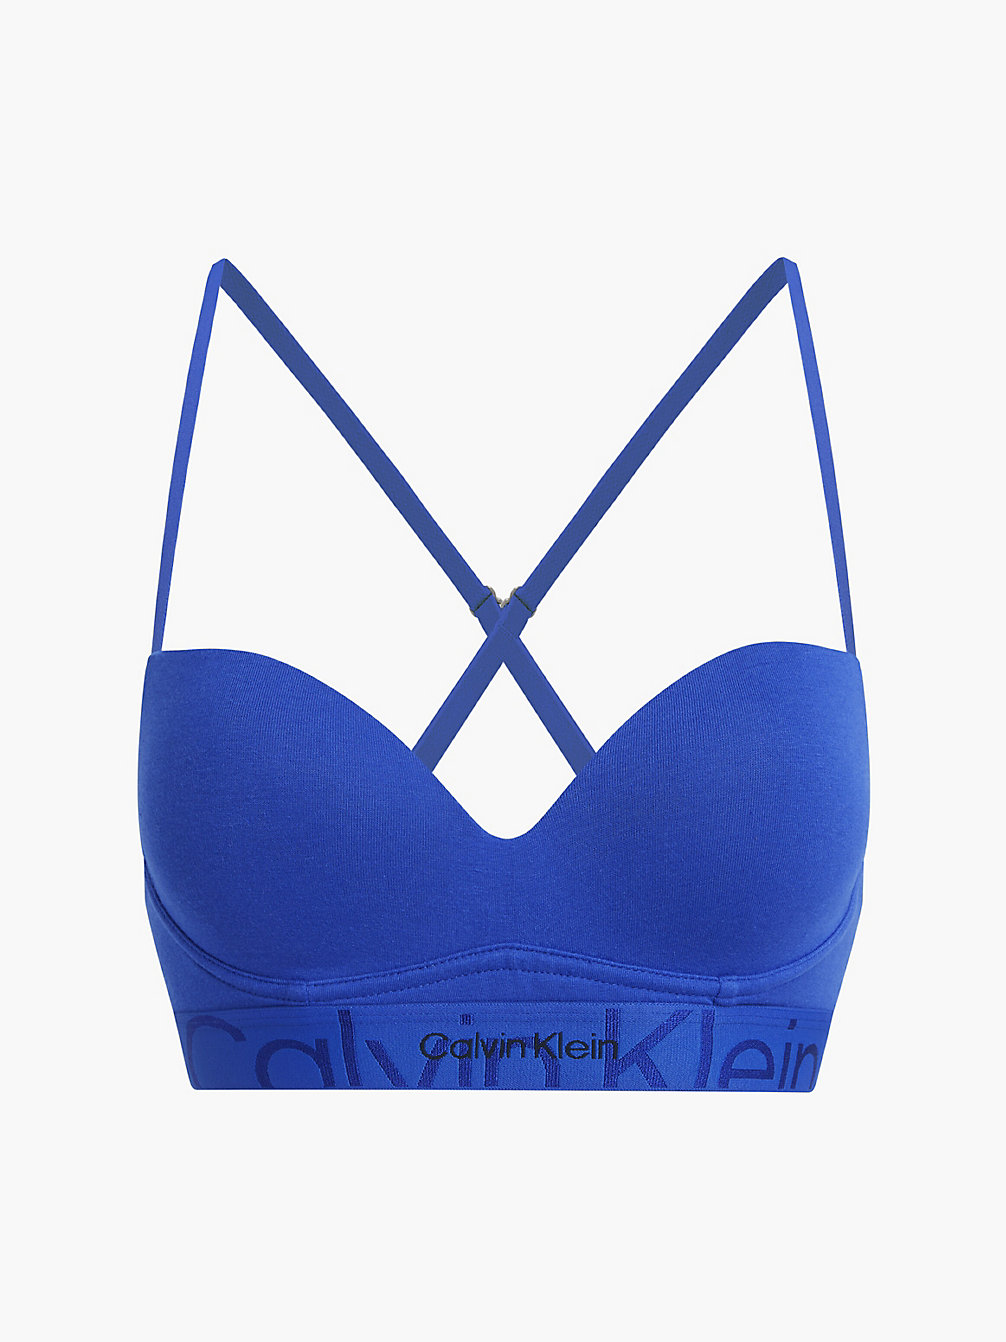 CLEMATIS Push Up Bralette - Embossed Icon undefined women Calvin Klein